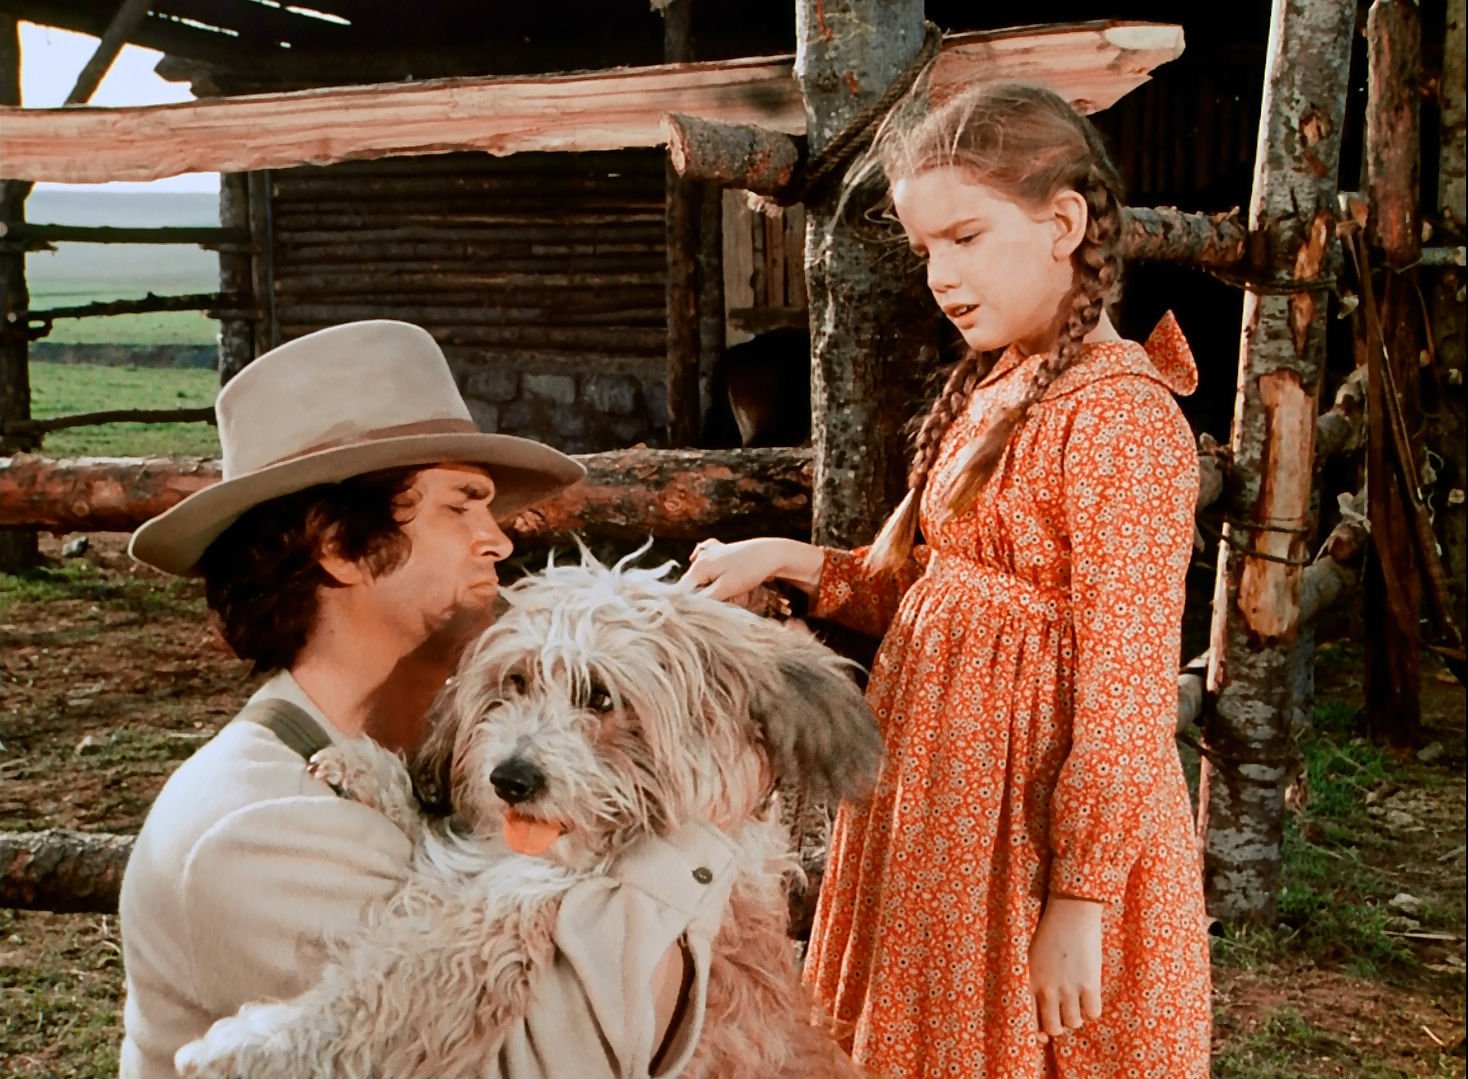 How Well Do You Know “Little House on the Prairie”? 19